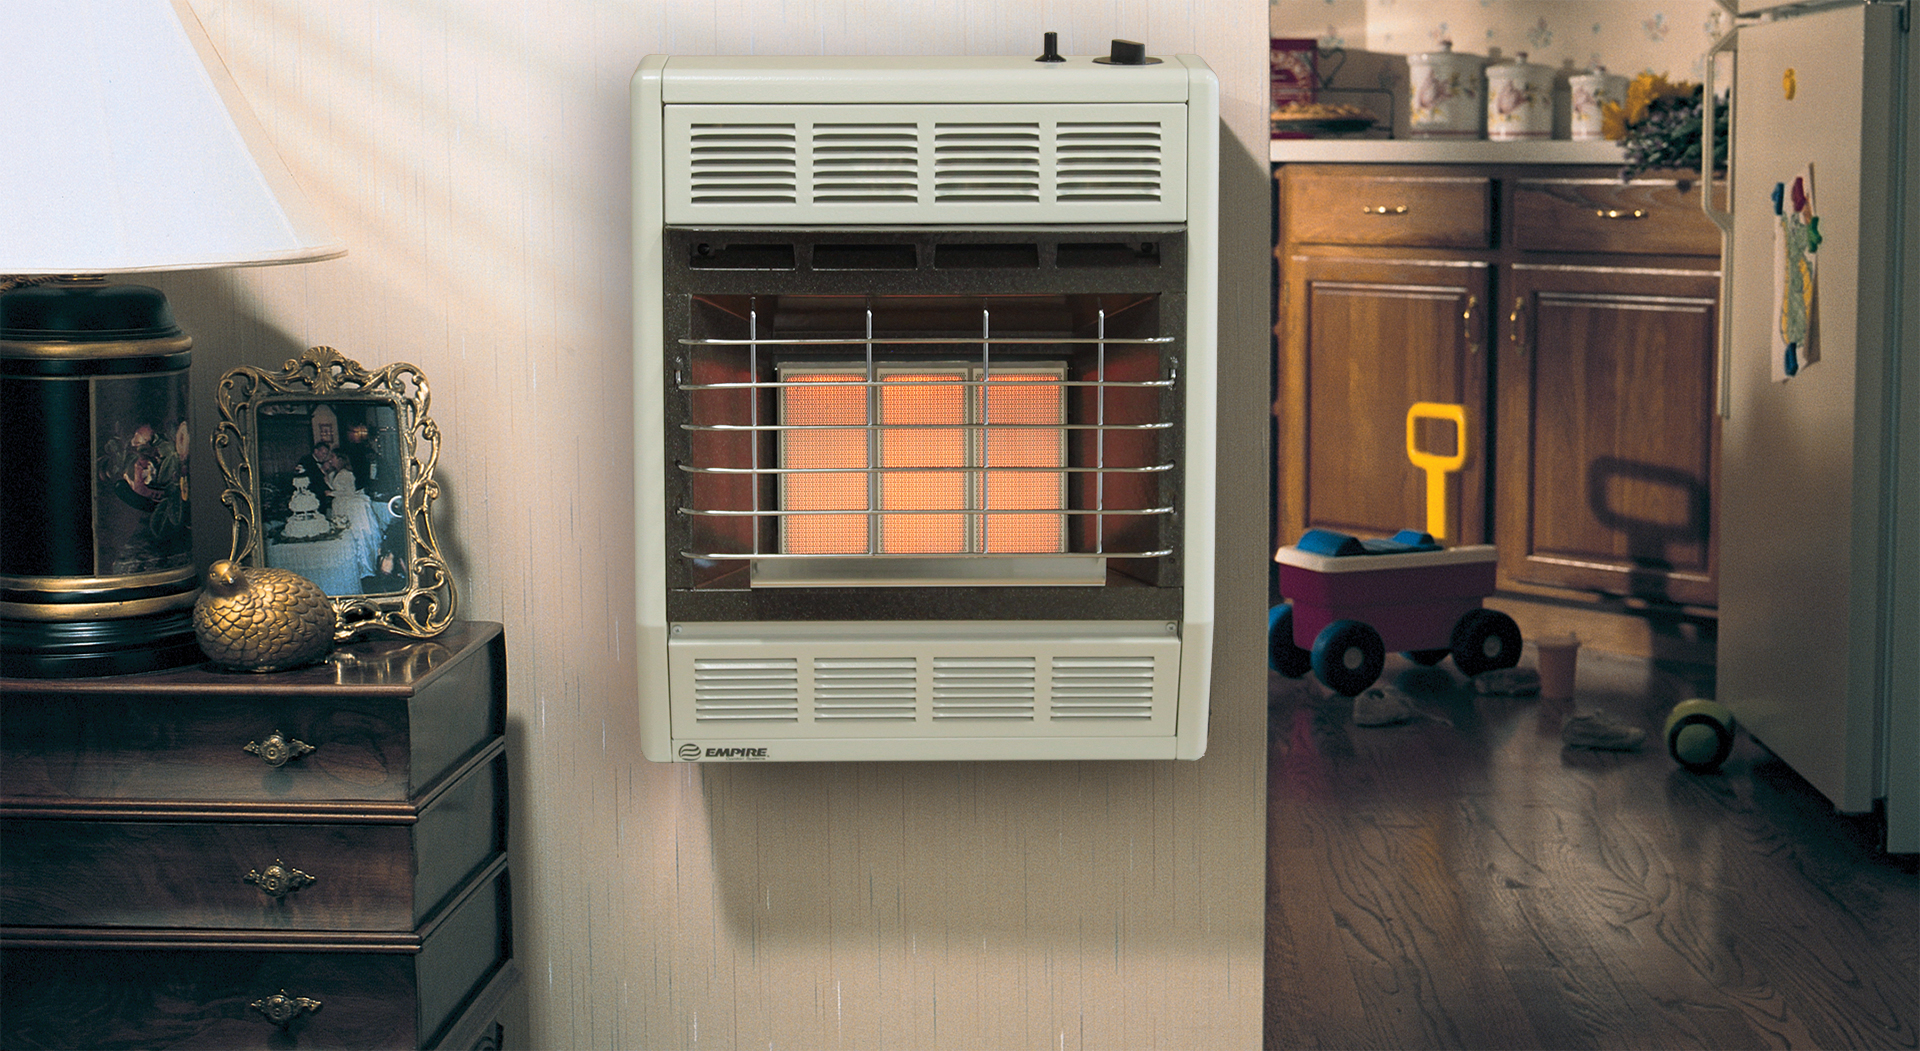 natural-gas-wall-heaters-discount-outlet-save-40-jlcatj-gob-mx